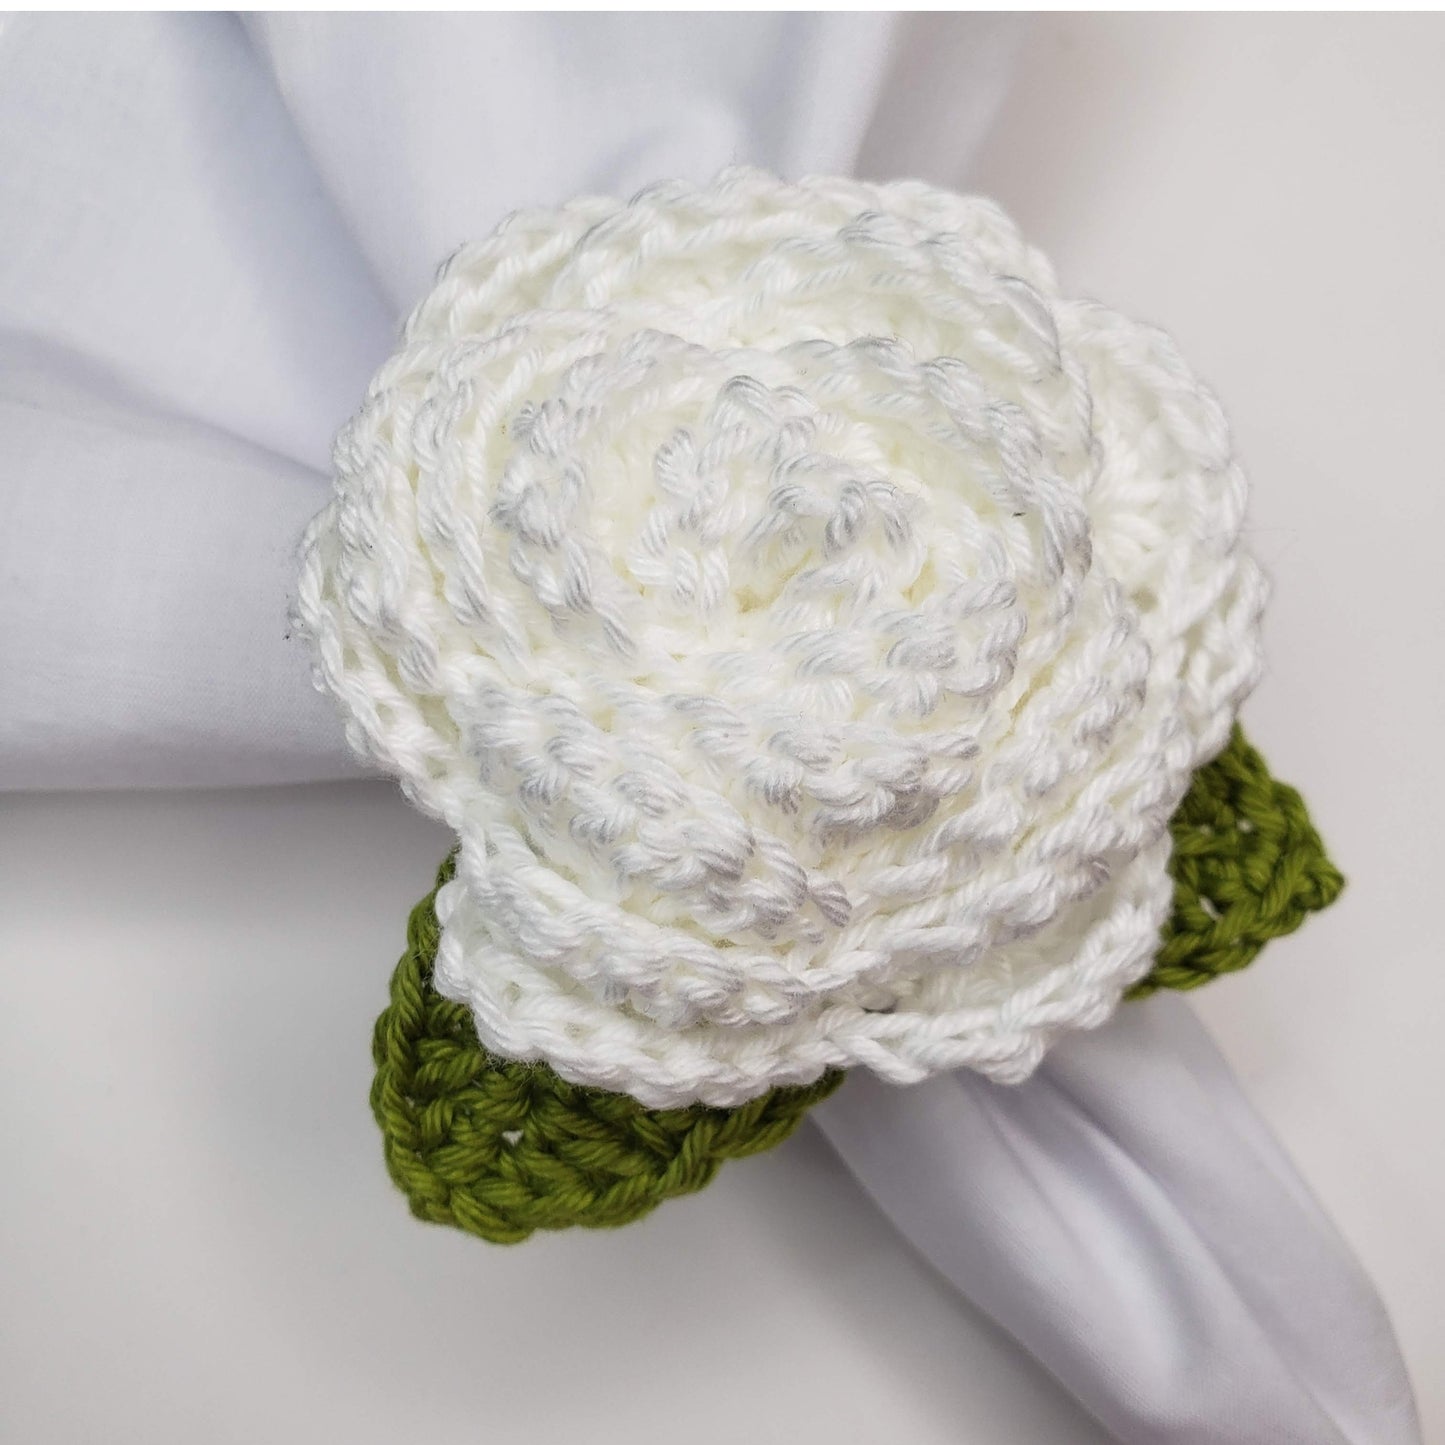 Charlo's Set of 4 White Crochet Rosebud Napkin Rings, High Quality Products, handmade, gifts